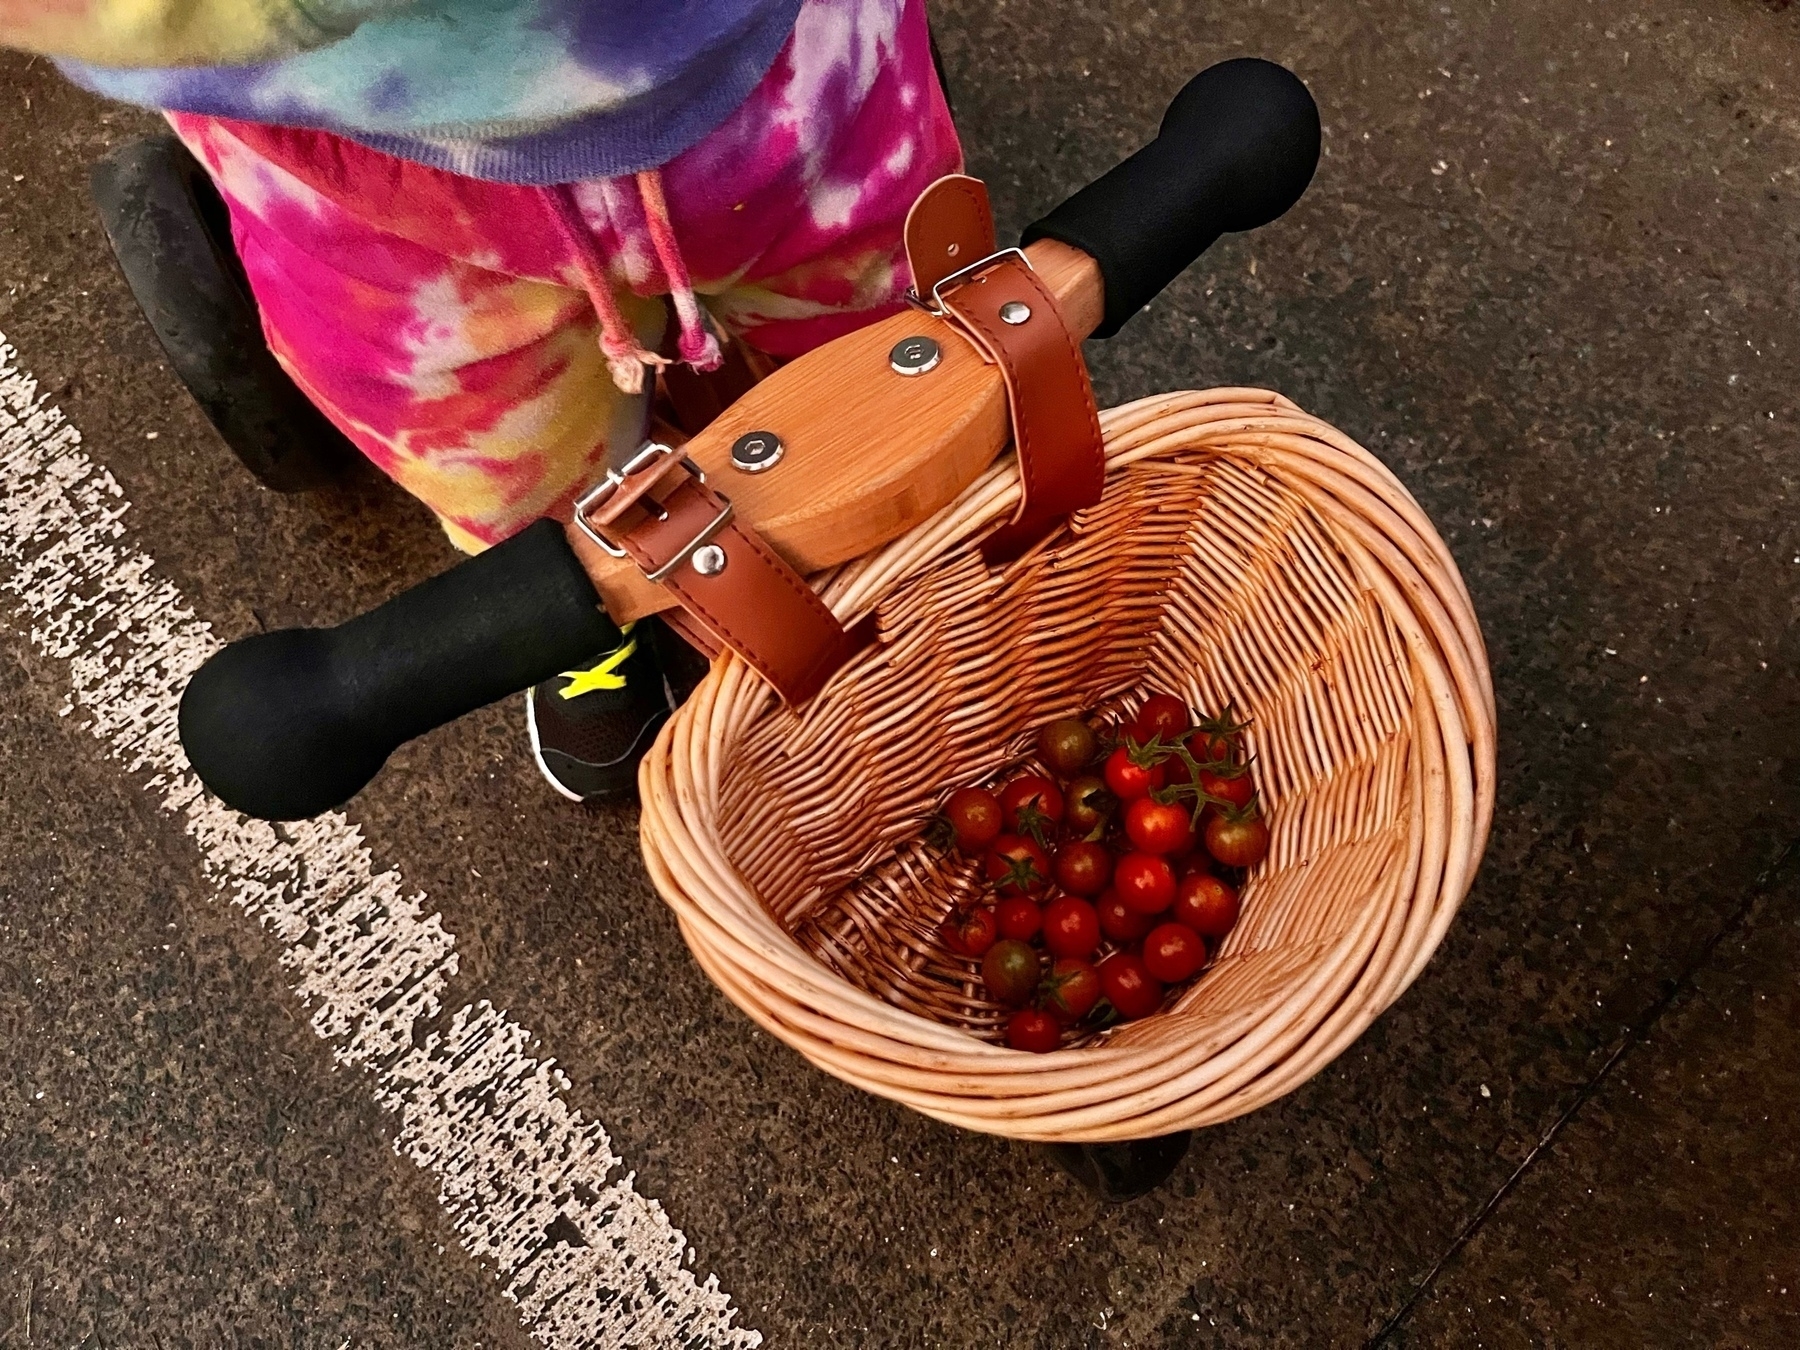 Cherry tomatoes in the basket of a kid's trike